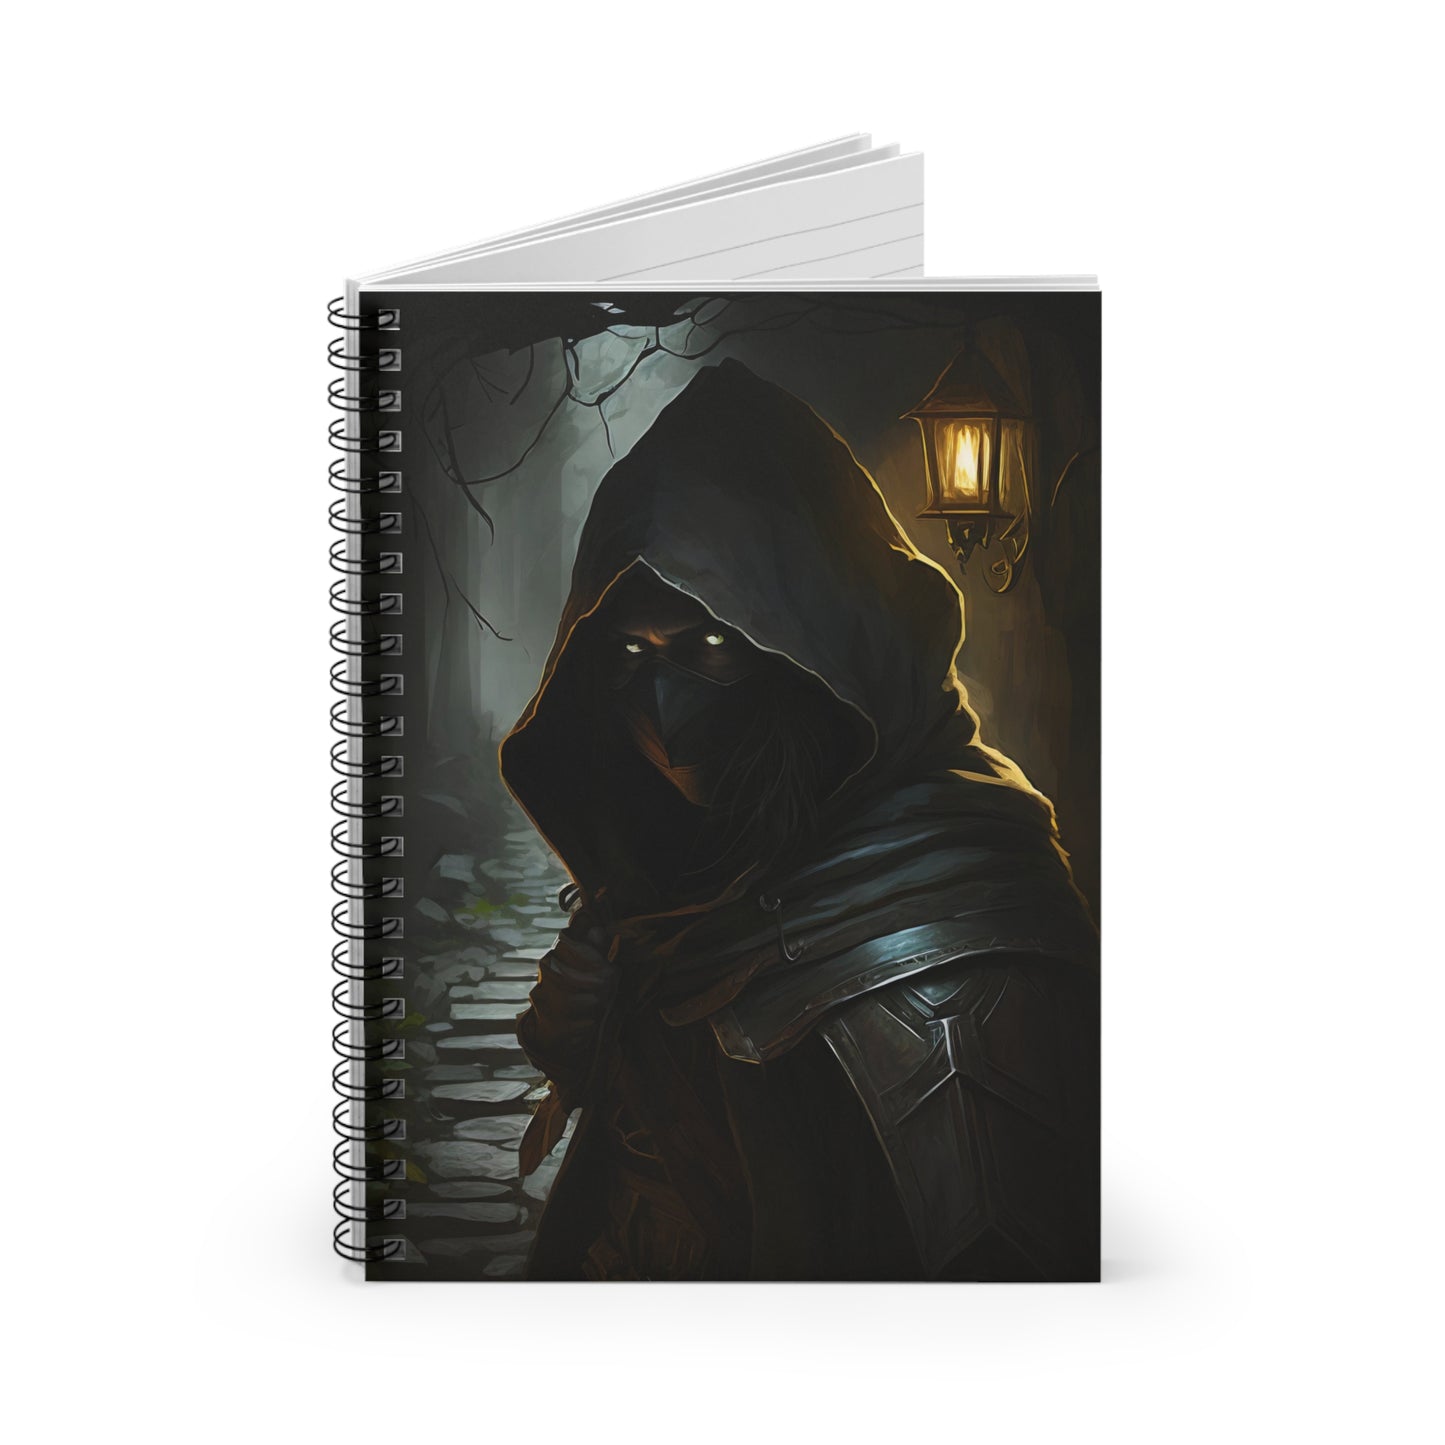 DnD Campaign Journal, Male Rogue Spiral Notebook, Ruled Line, Tabletop Gaming D&D Character Notepad, Pathfinder Journal, Shadow's Veil